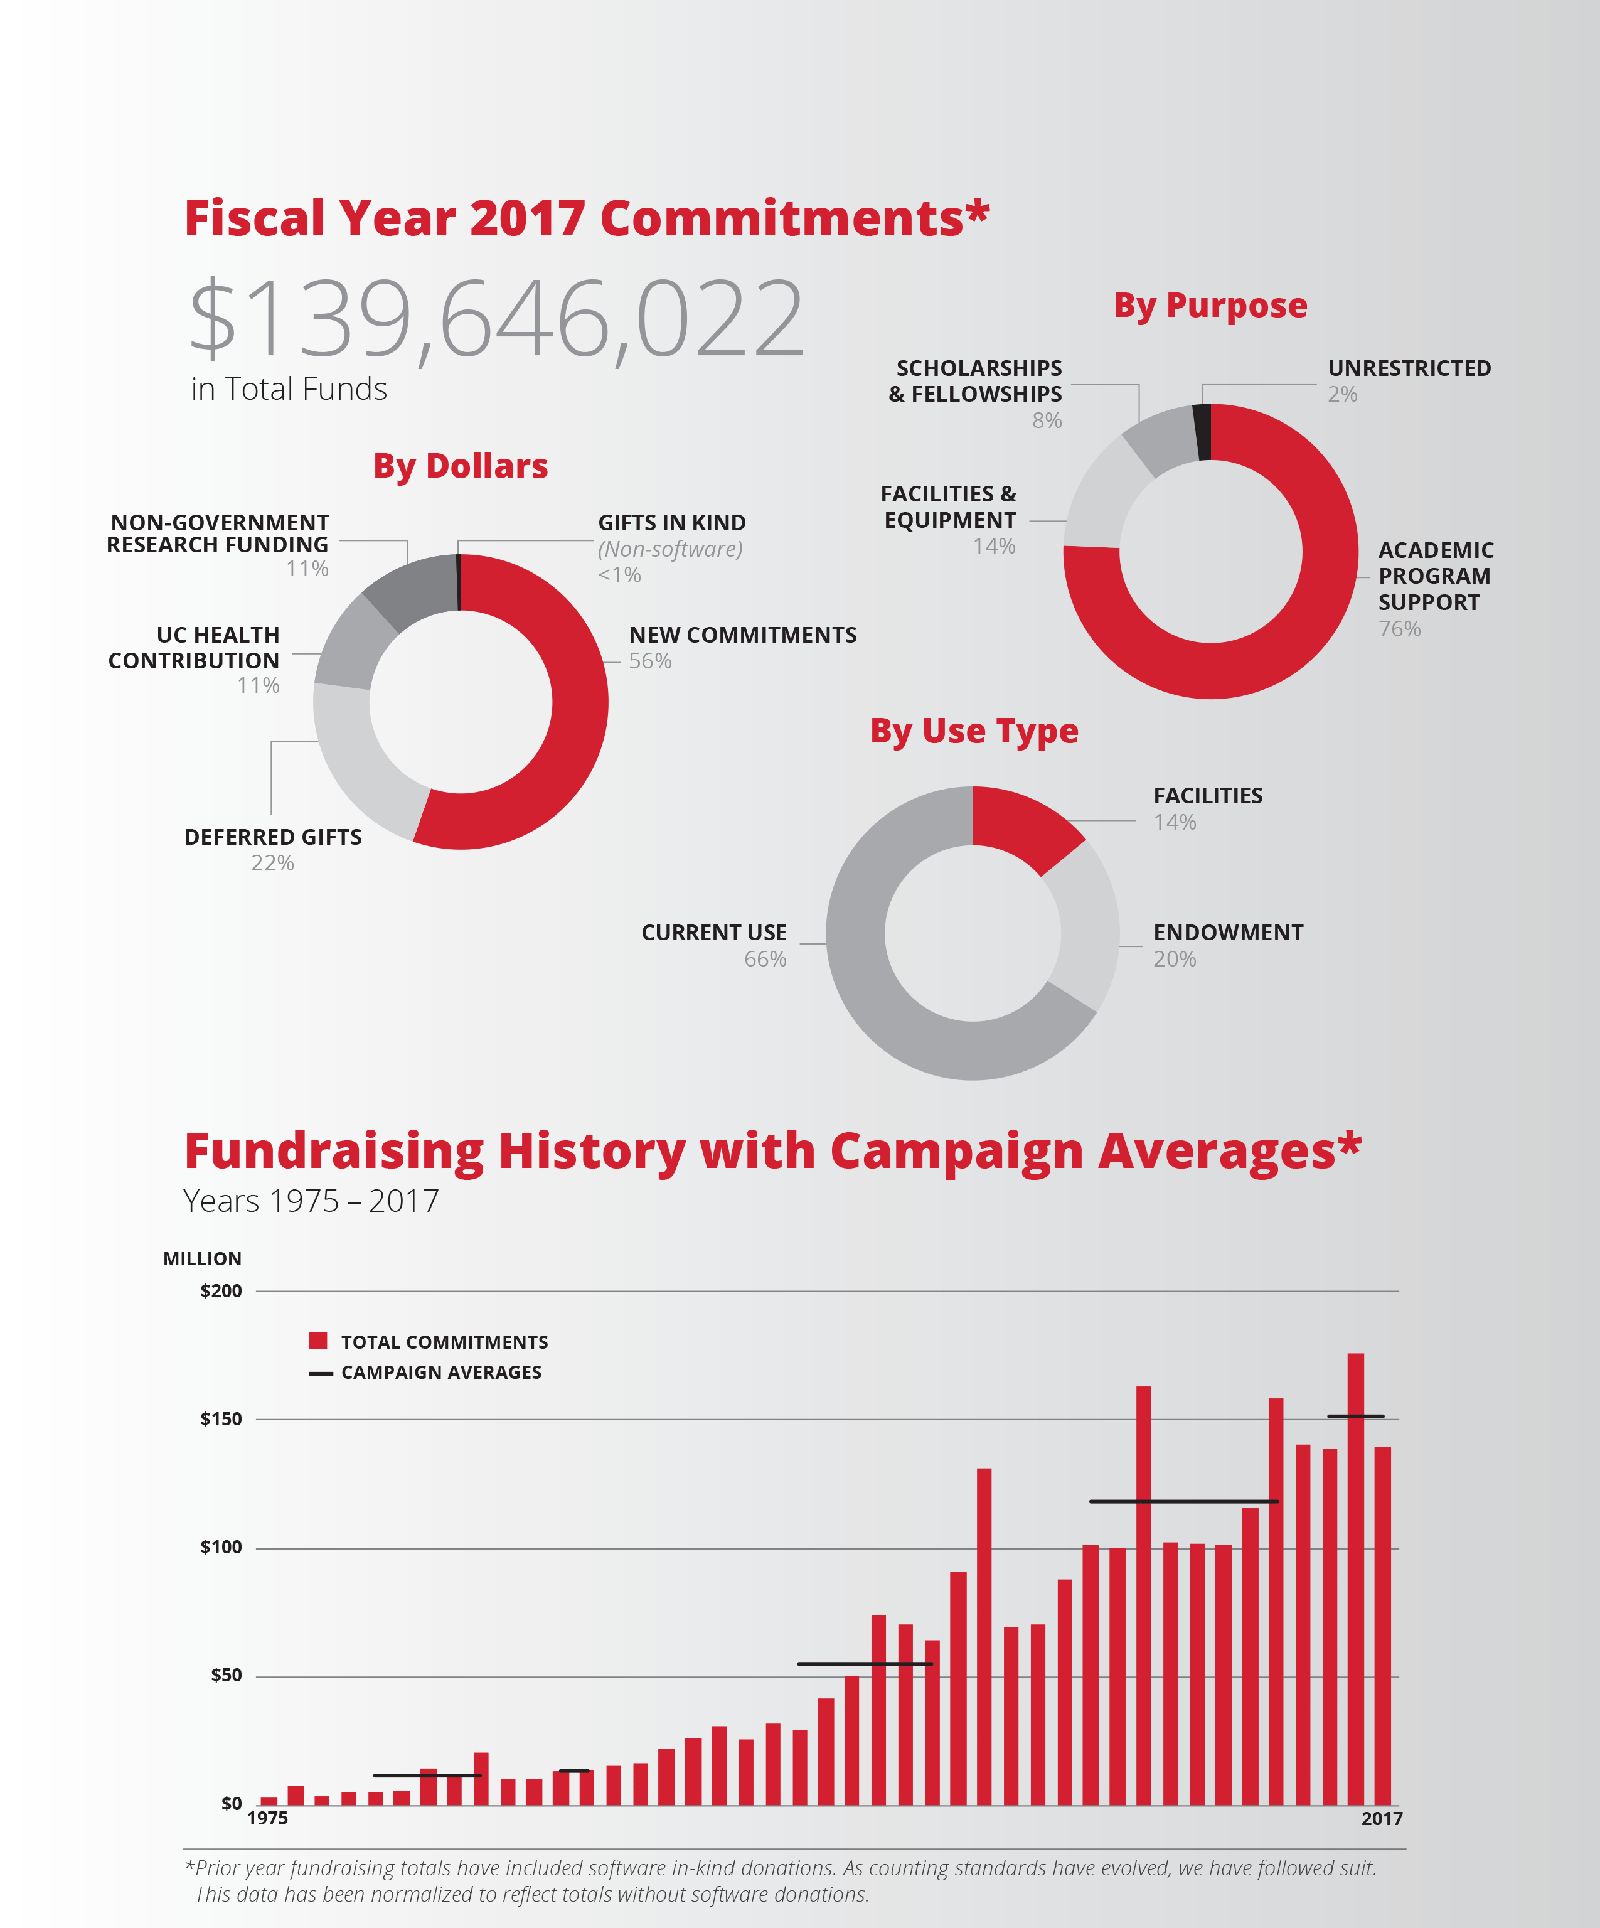 Fiscal Year 2017 Commitments